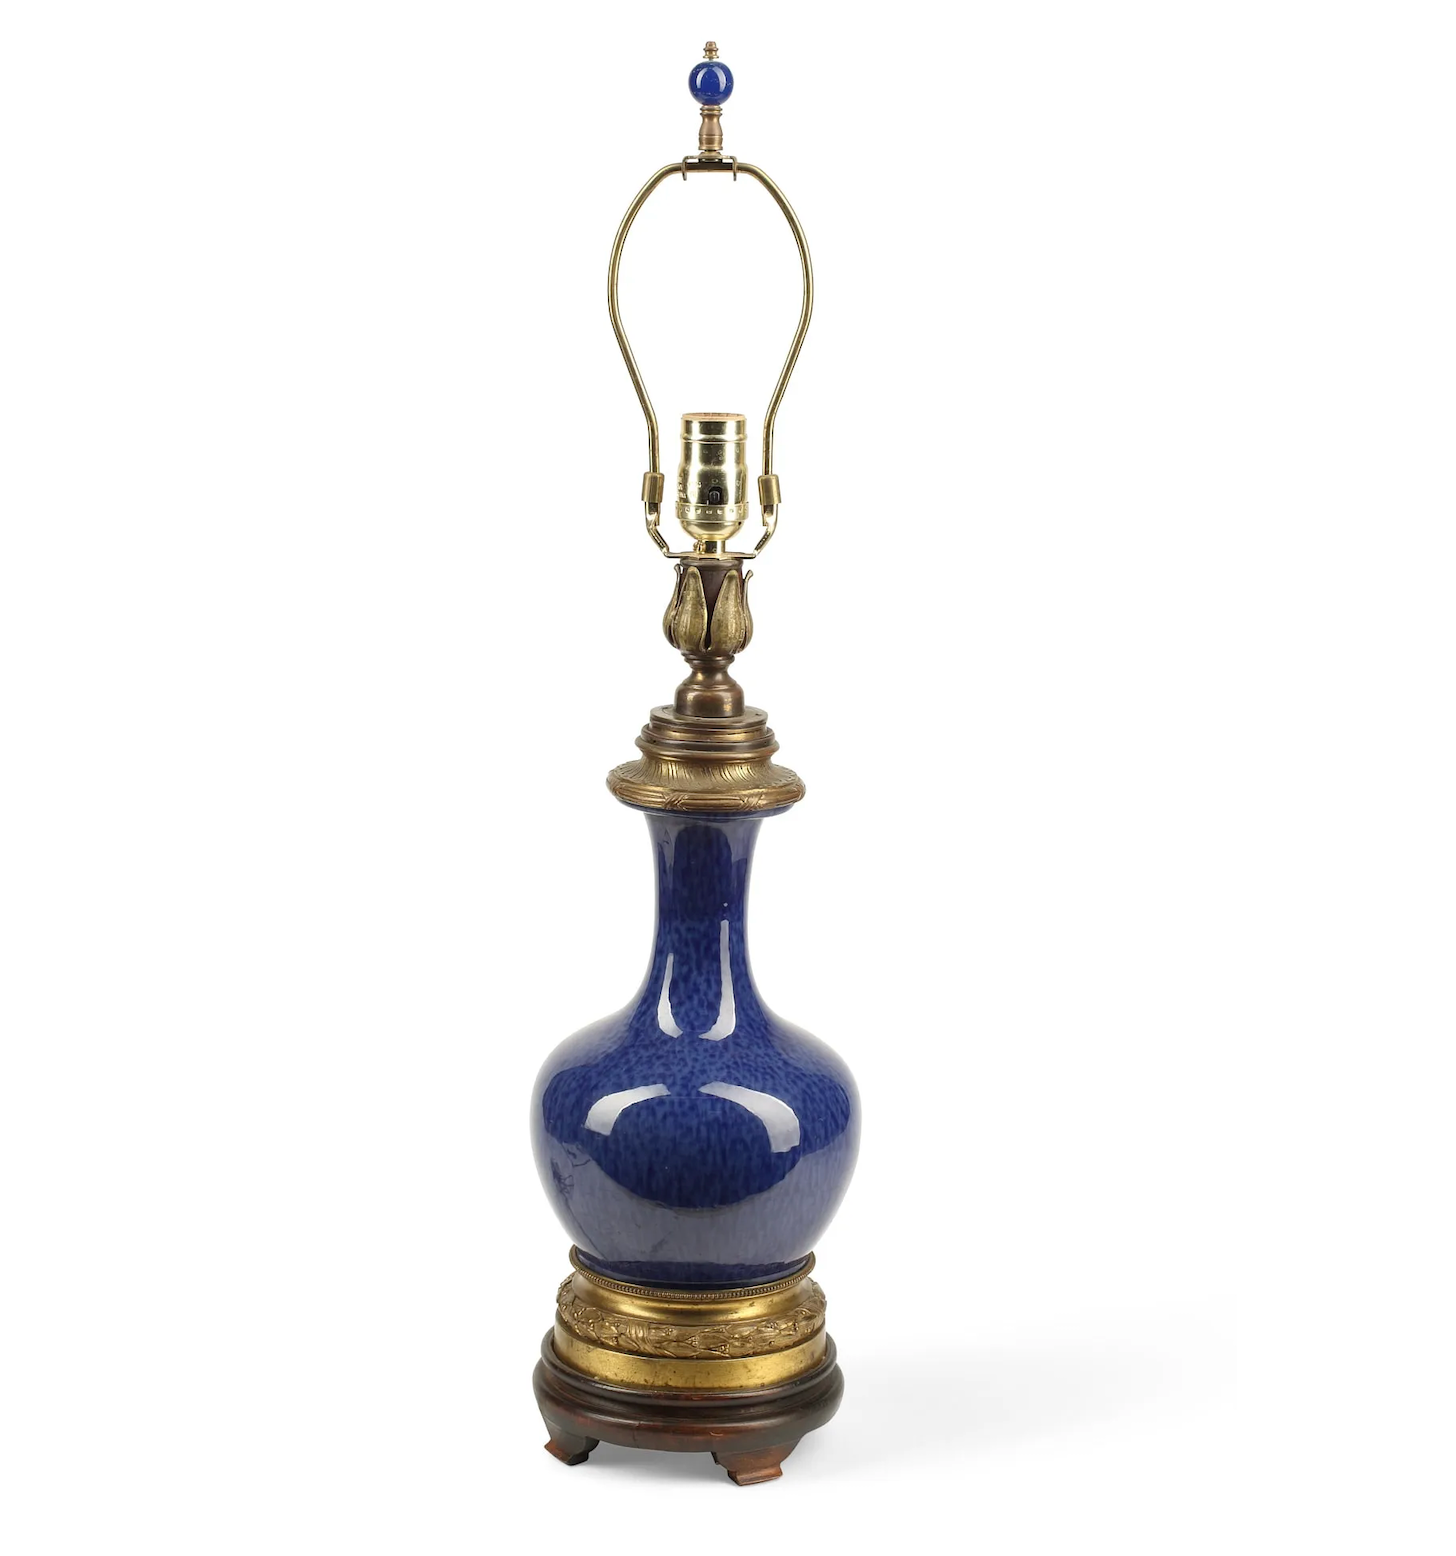 AL2-021: A Chinese Porcelain and Bronze Vase Mounted as a Lamp - Circa 1920